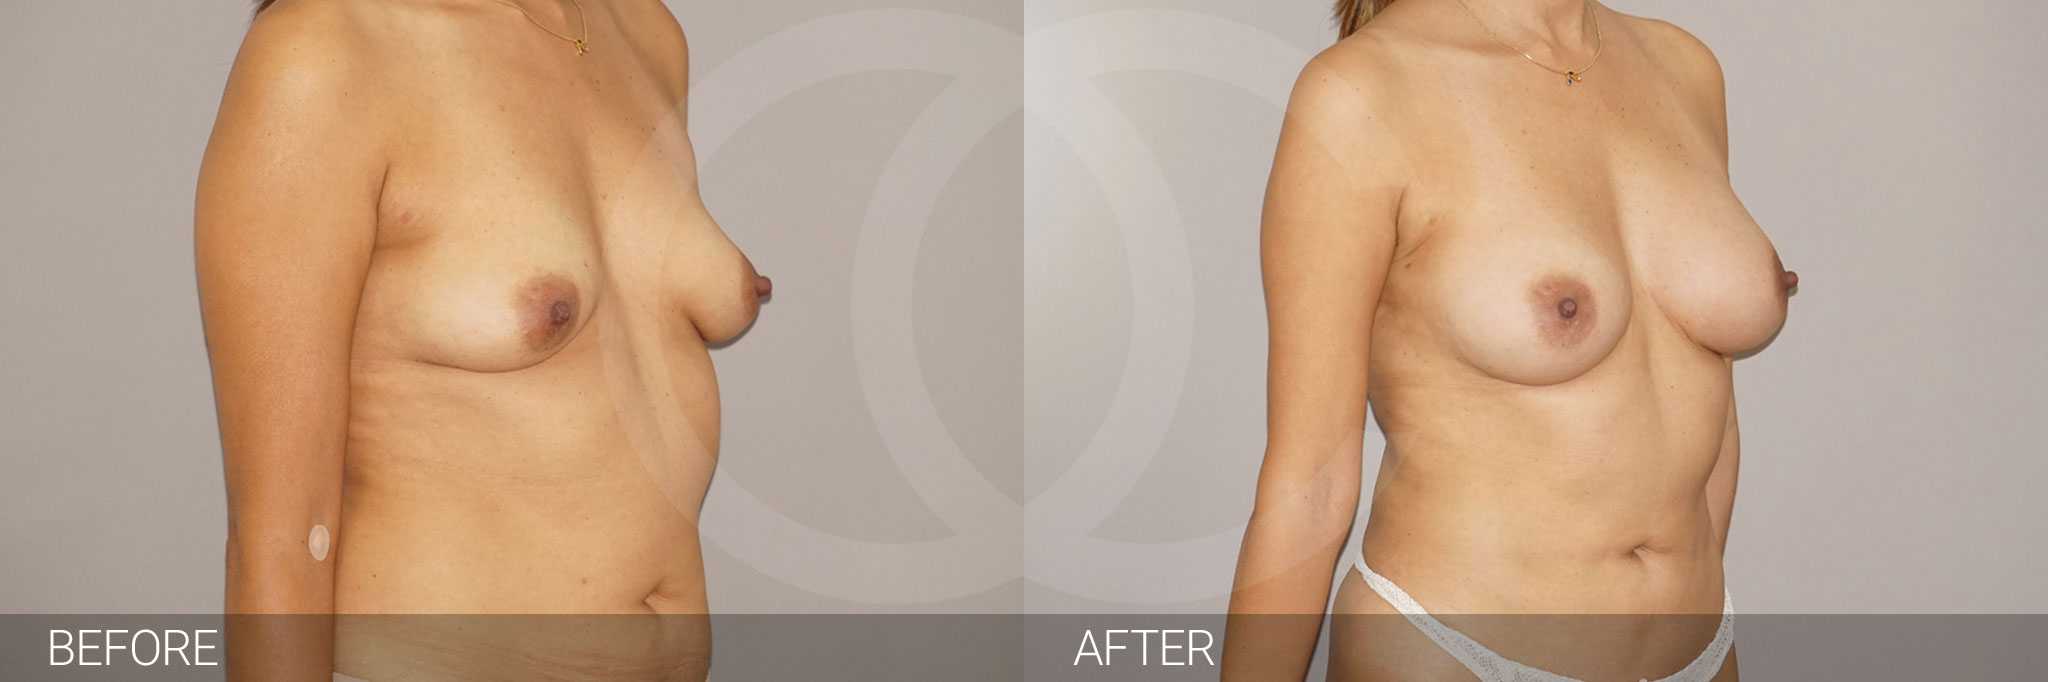 Breast augmentation with fat grafting.